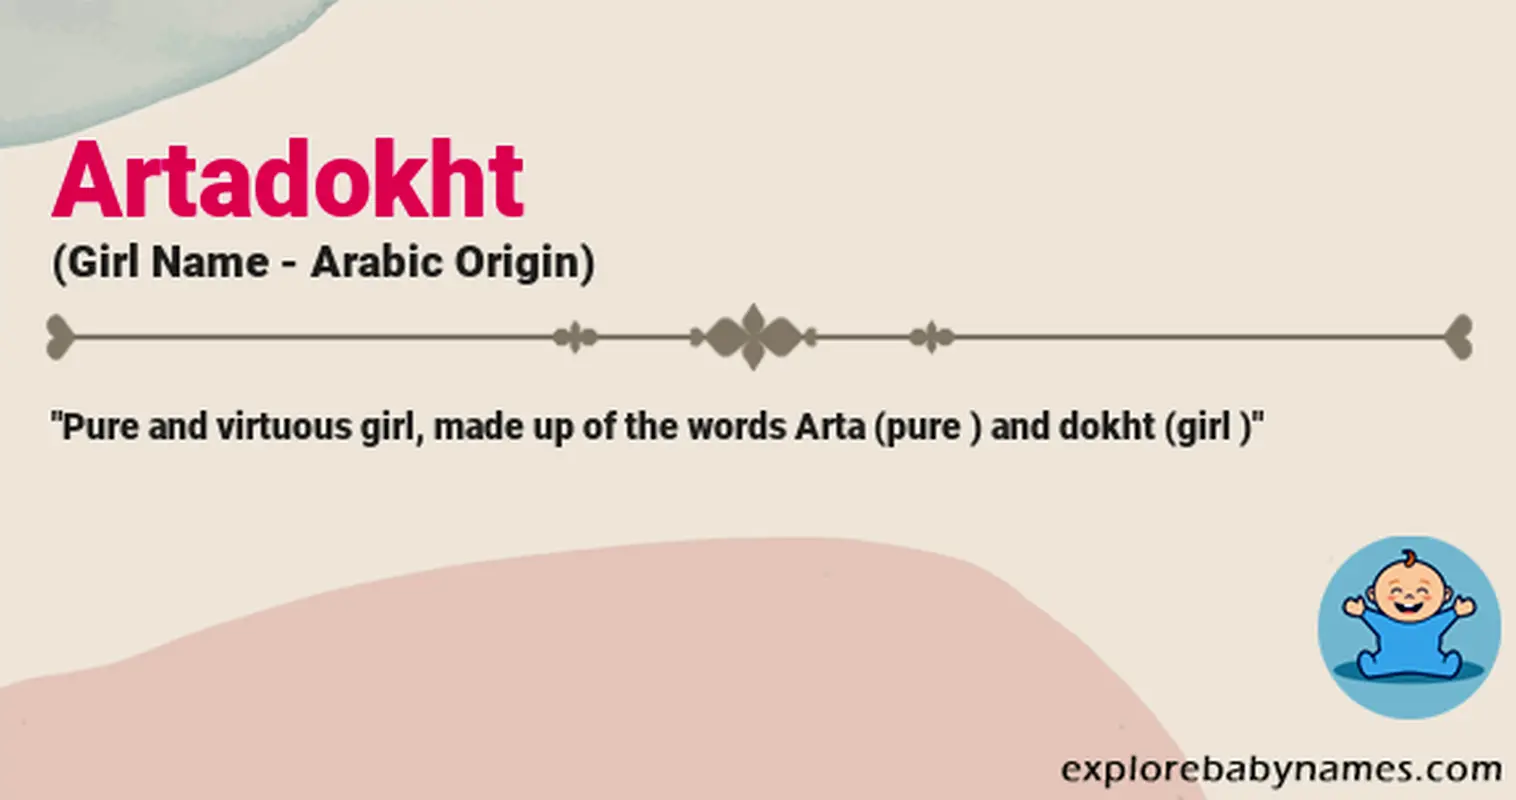 Meaning of Artadokht